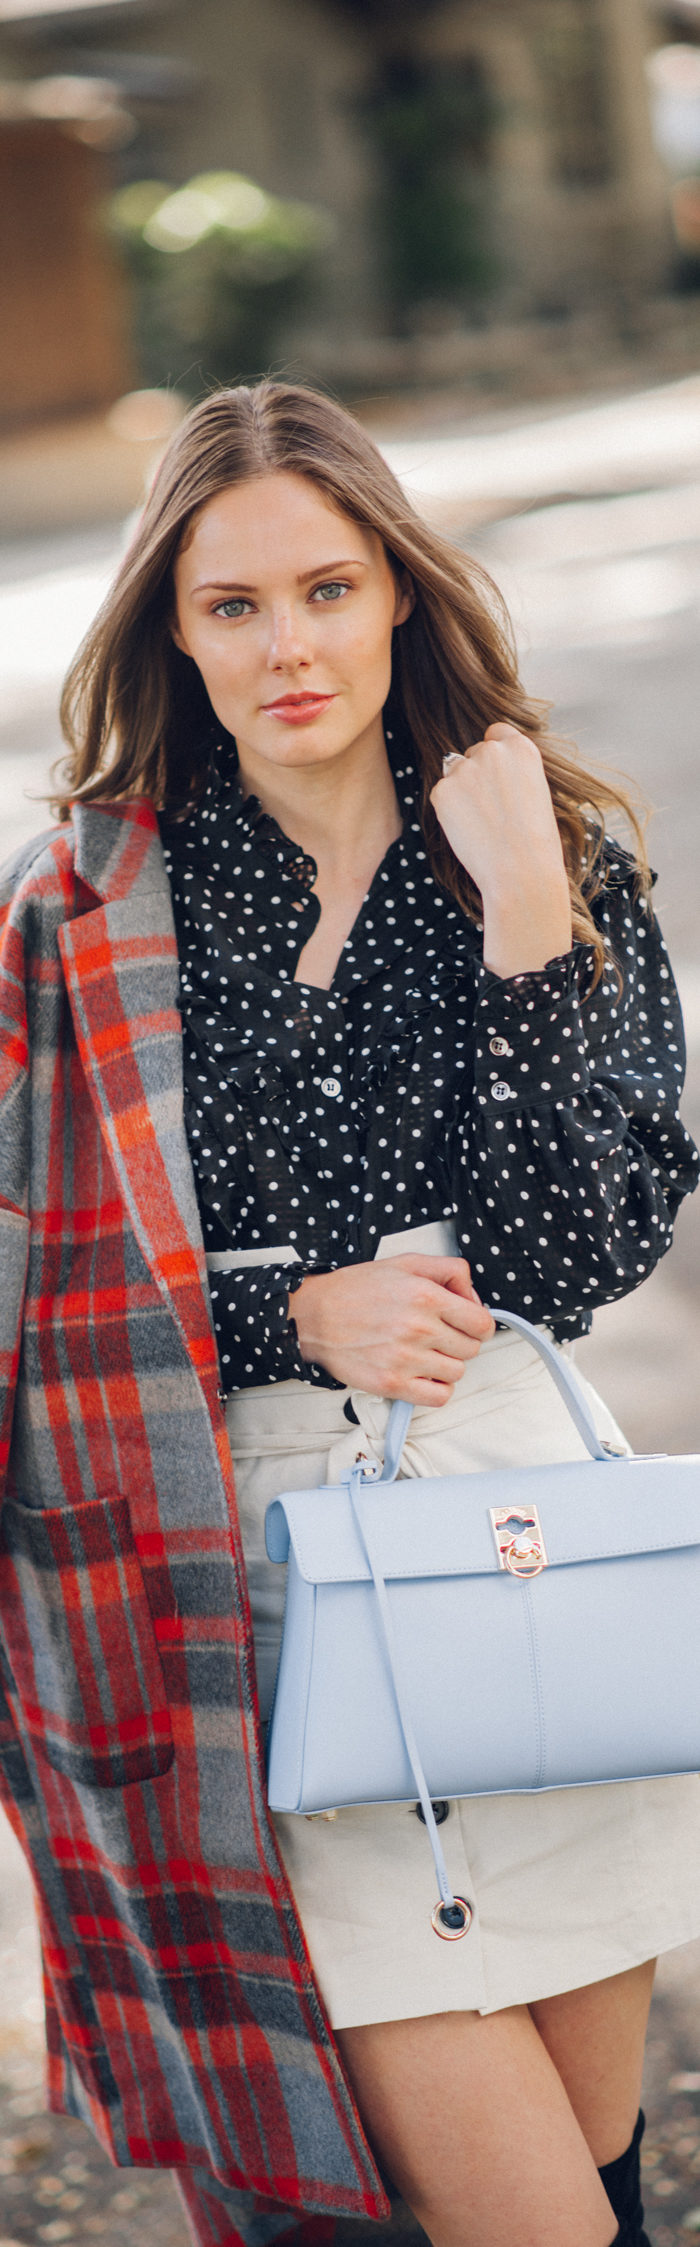 Alyssa Campanella of The A List blog shares her favorite plaid coats for fall wearing DRA plaid coat, Alexa Chung polka dot blouse, Lovers + Friends button up skirt, and Cafune small stance bag